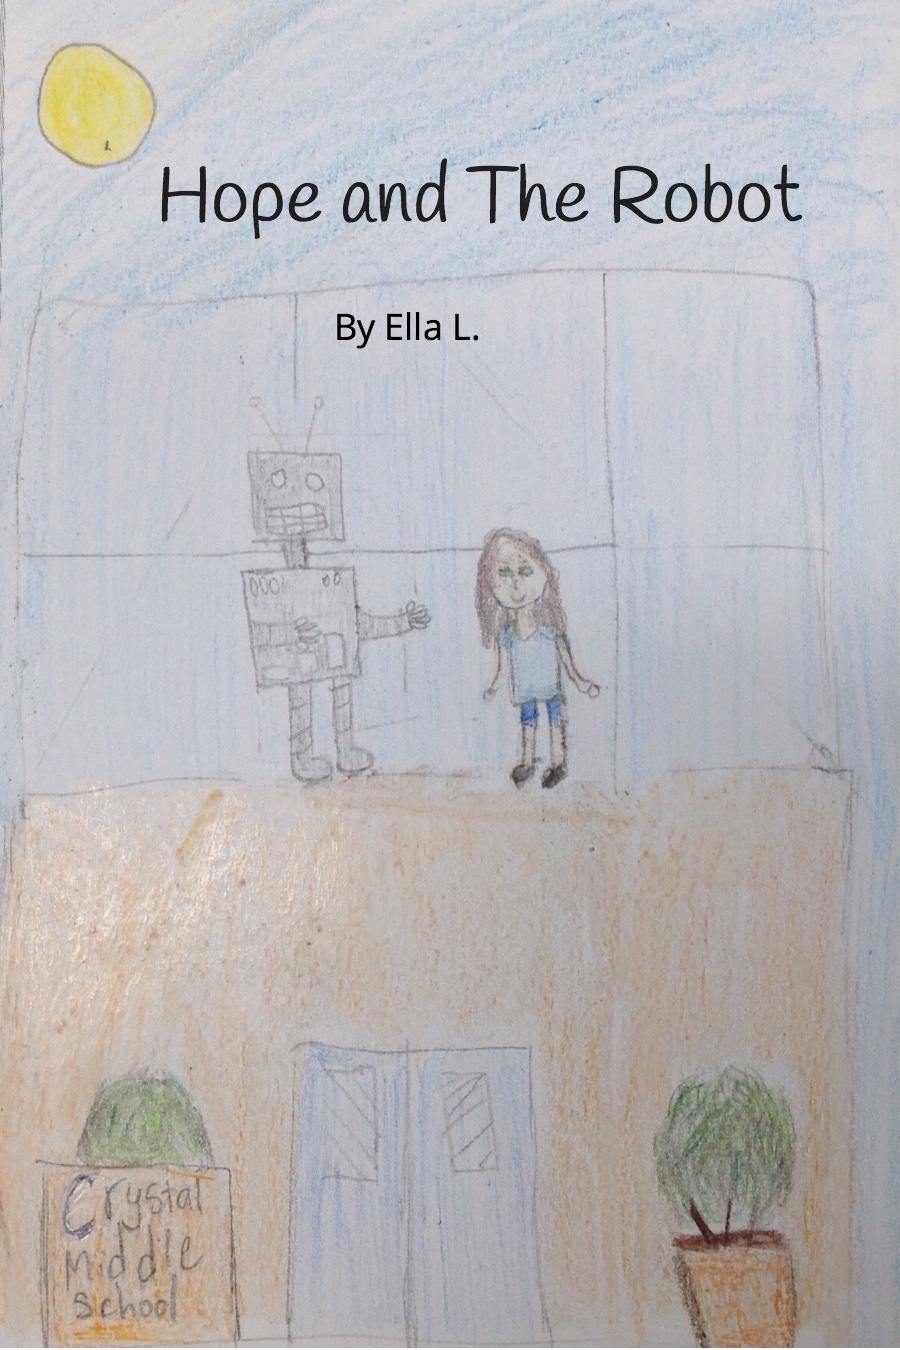 Hope and The Robot by Ella L